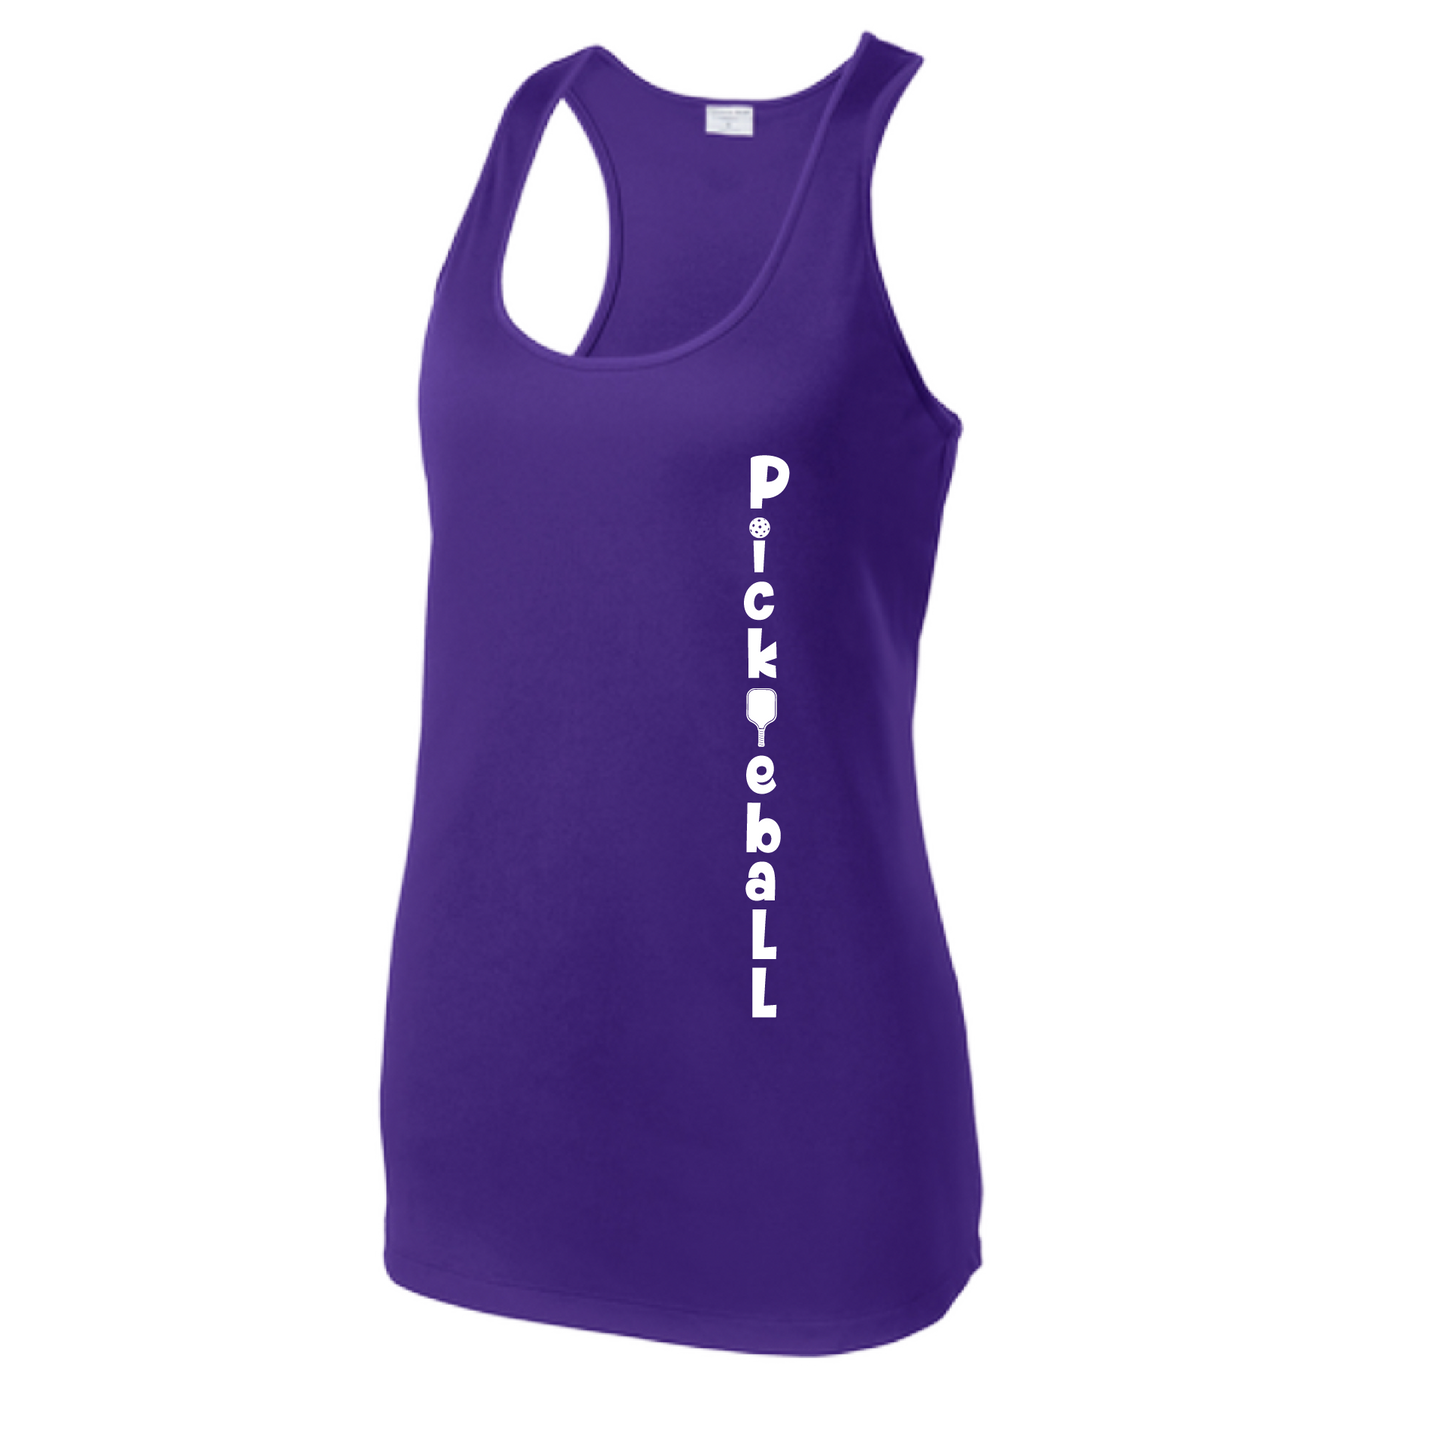 Pickleball Design: Pickleball Vertical Customizable Location  Women's Style: Racerback Tank  Shirt are lightweight, roomy and highly breathable. These moisture-wicking shirts are designed for athletic performance. They feature PosiCharge technology to lock in color and prevent logos from fading. Removable tag and set-in sleeves for comfort.